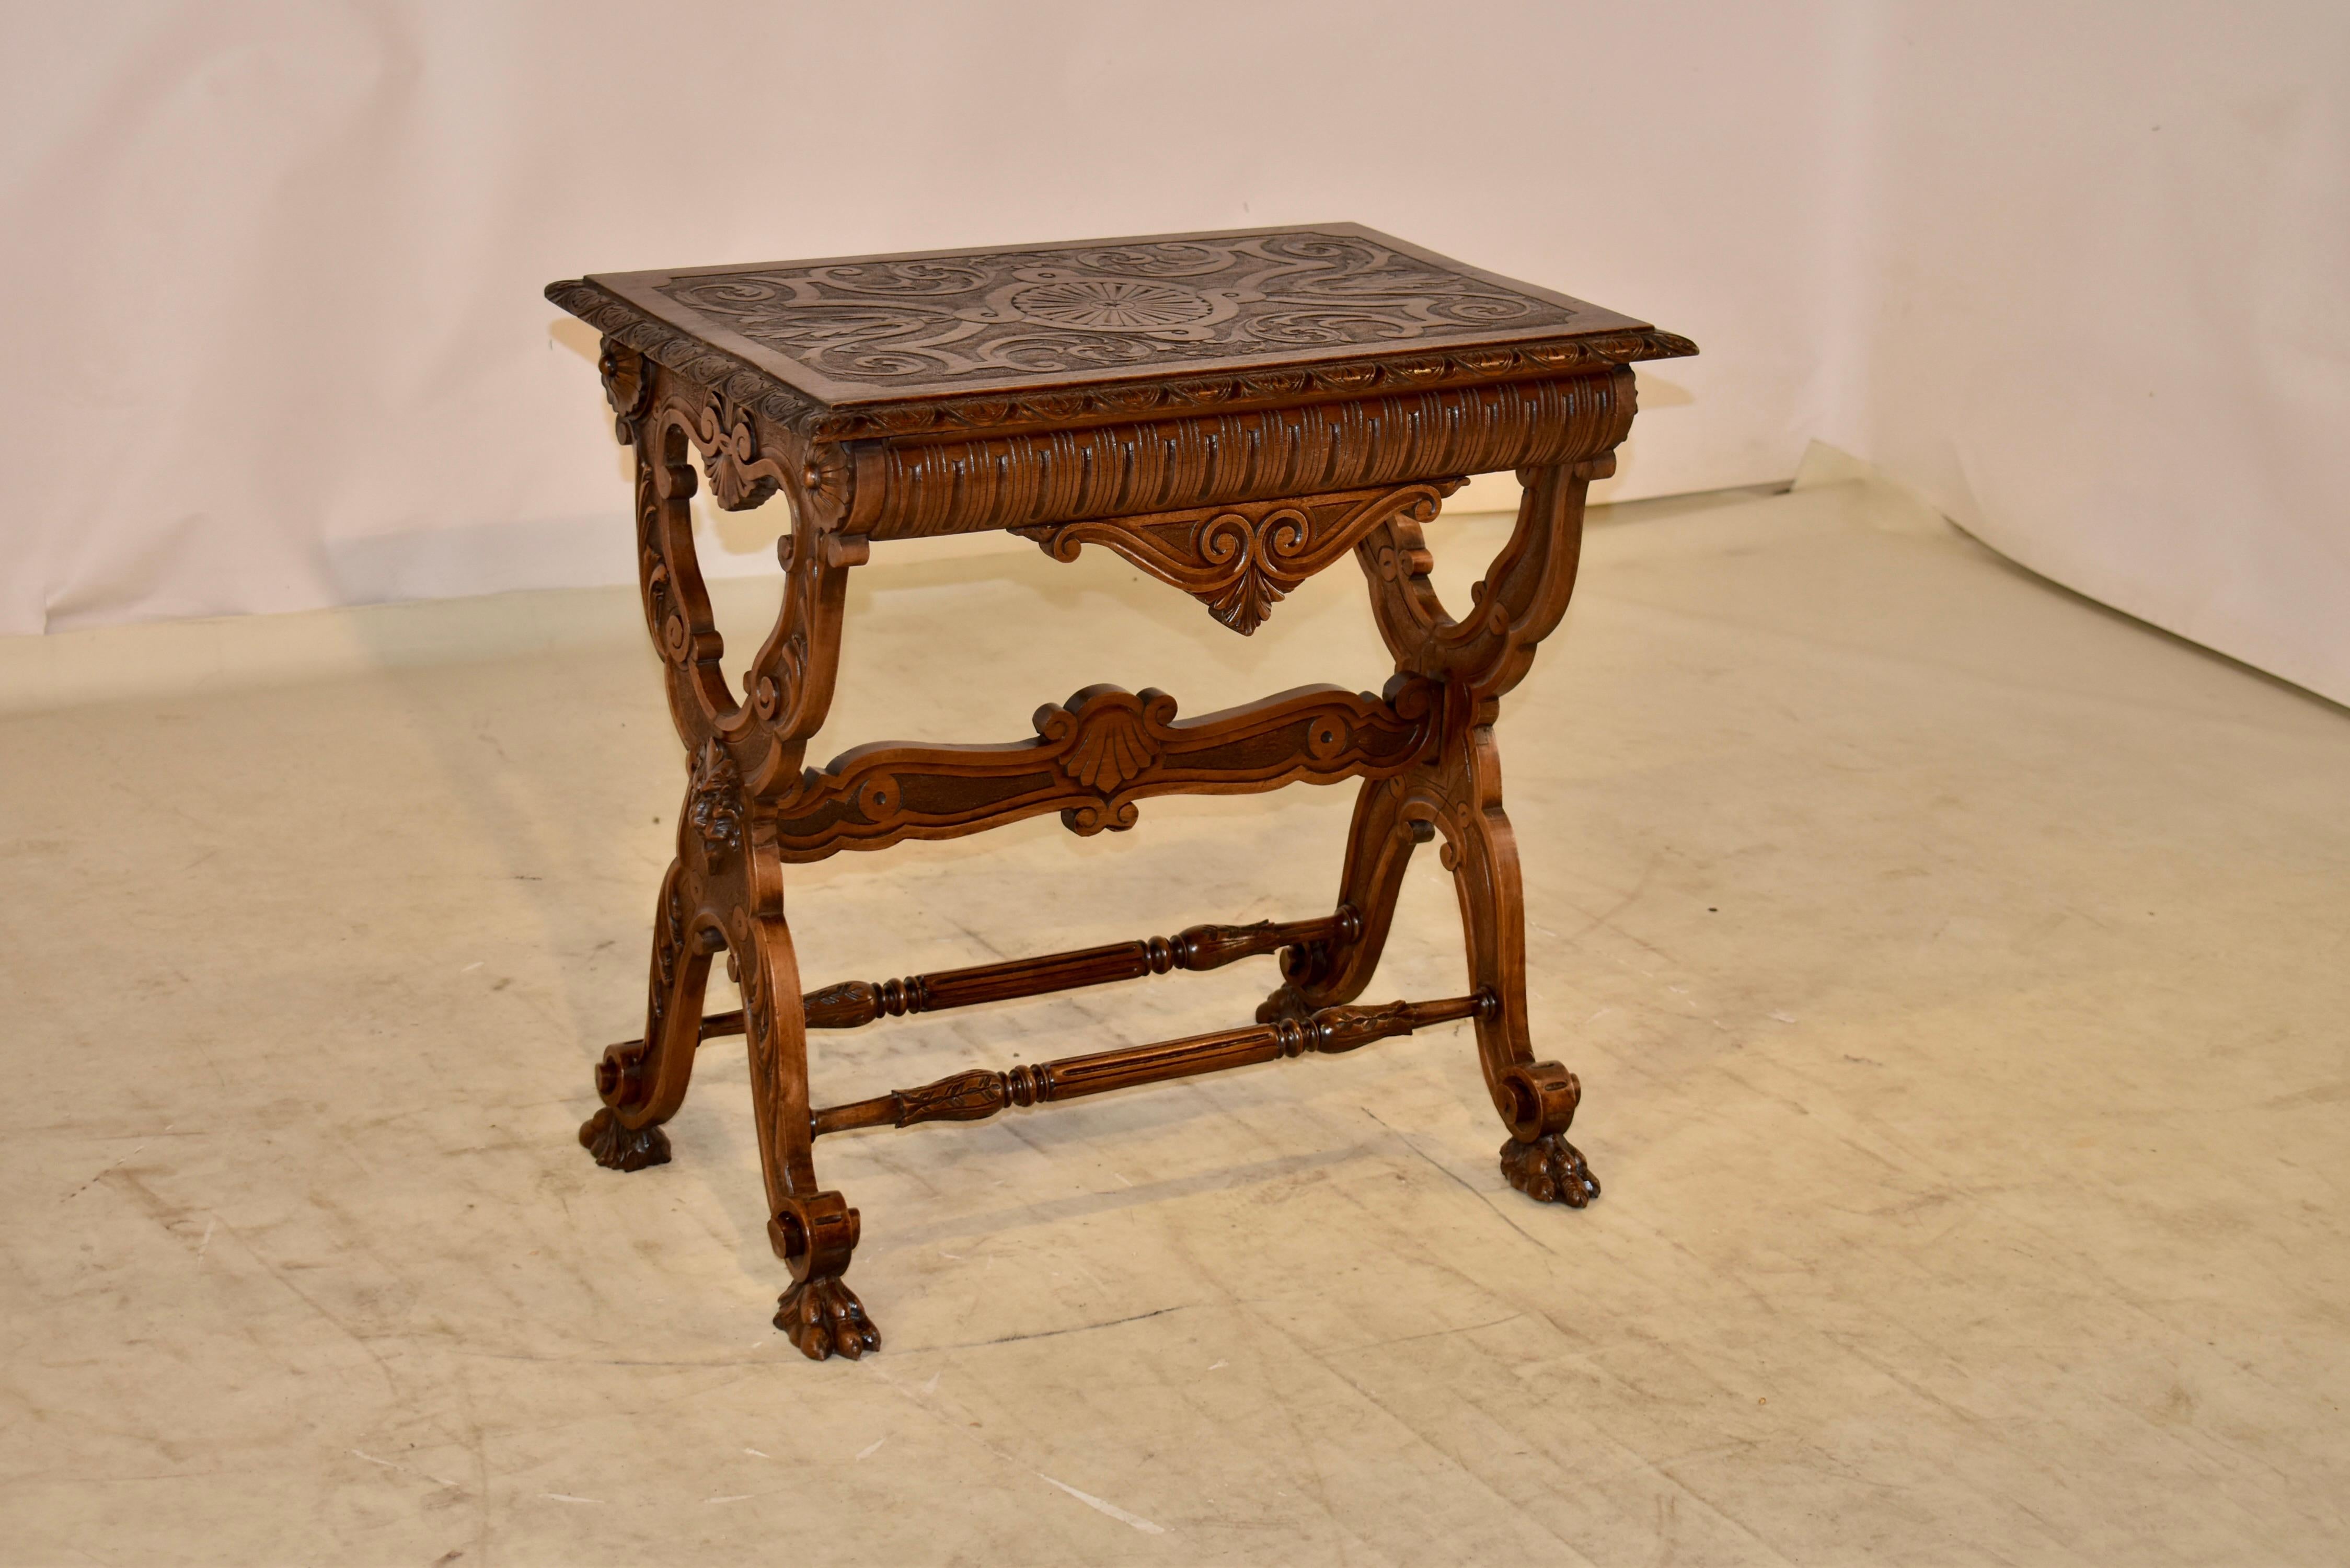 19th century oak side table from France, with a beveled and hand carved decorated edge around the top, surrounding an exquisitely hand carved central scene, depicting scrolls, acanthus leaves and a central circular design. The top is supported on